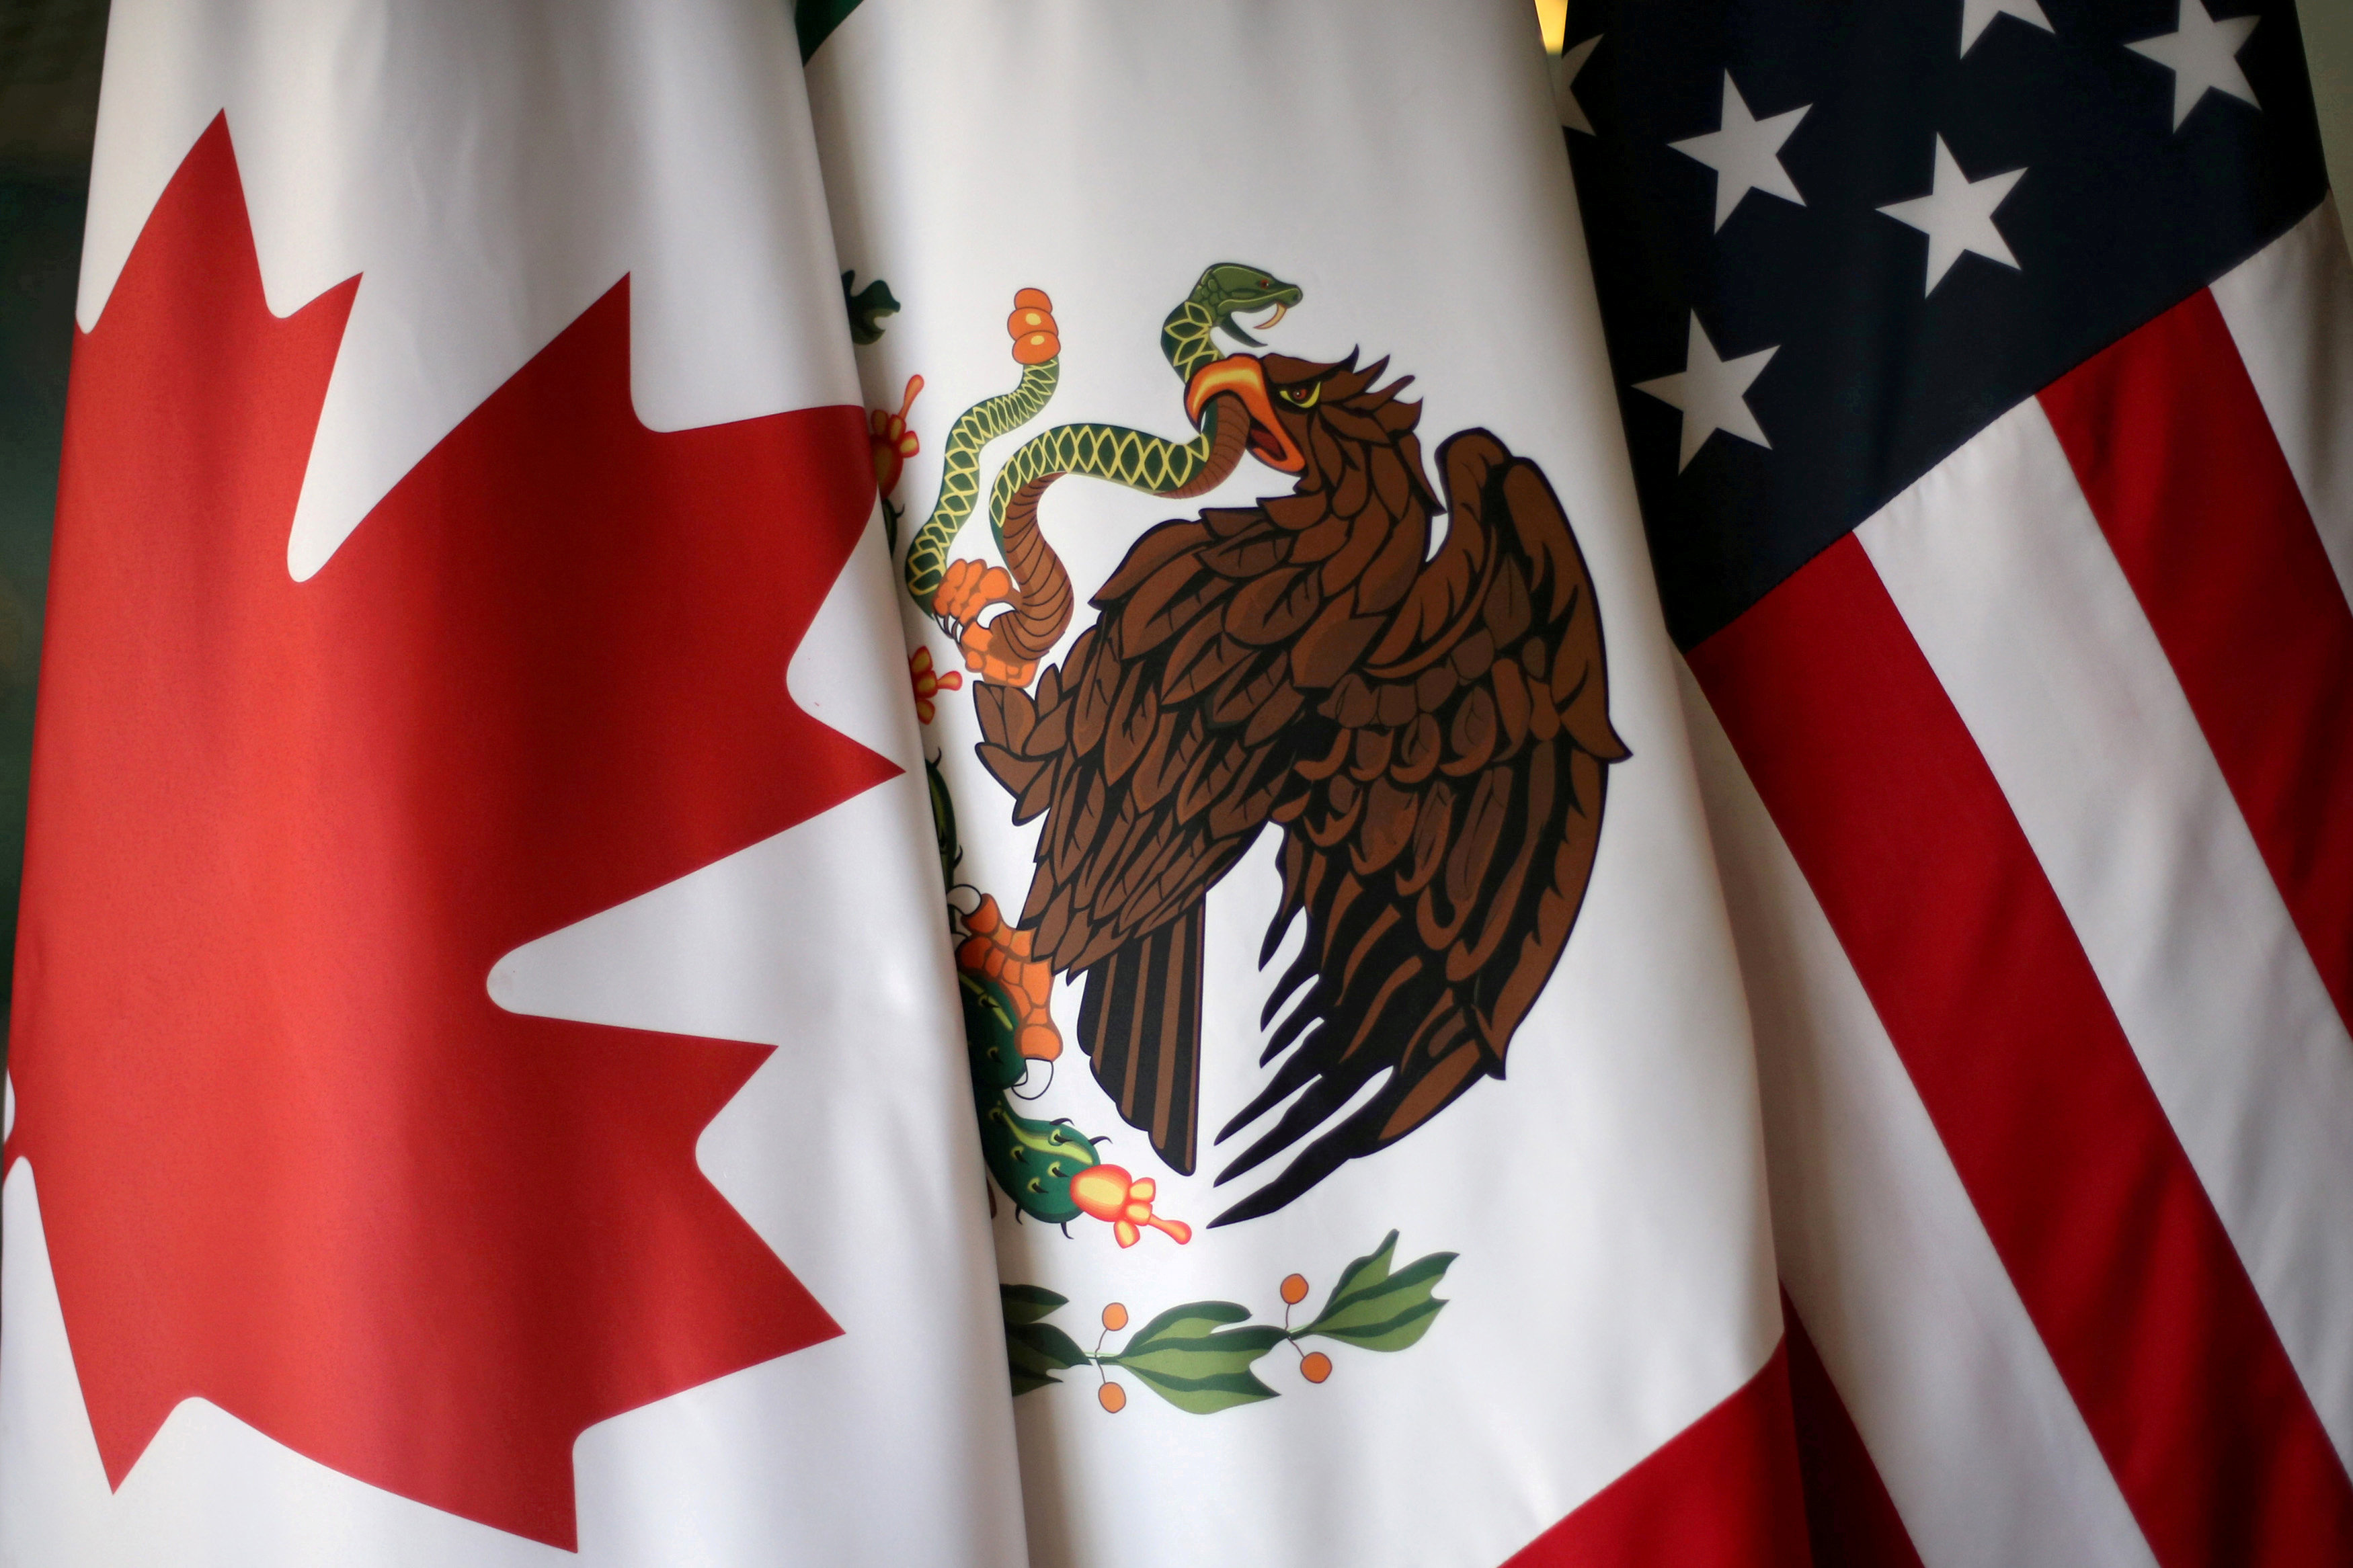 Ministers to meet on Tuesday to wrap up NAFTA deal